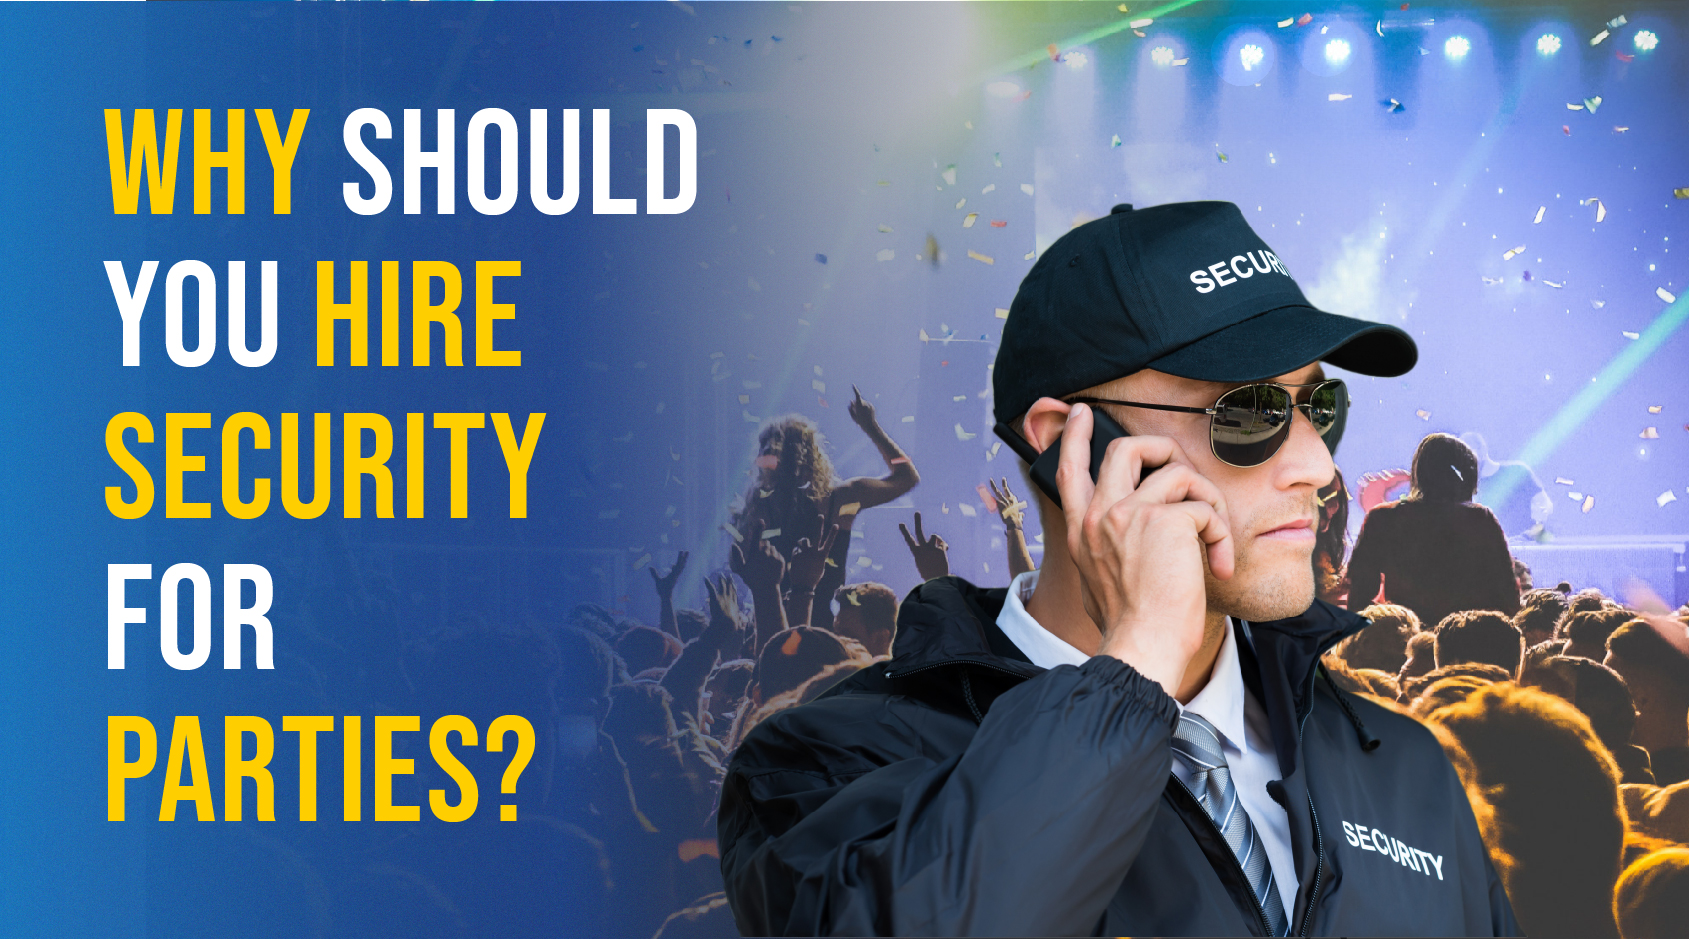 why should you hire security for parties